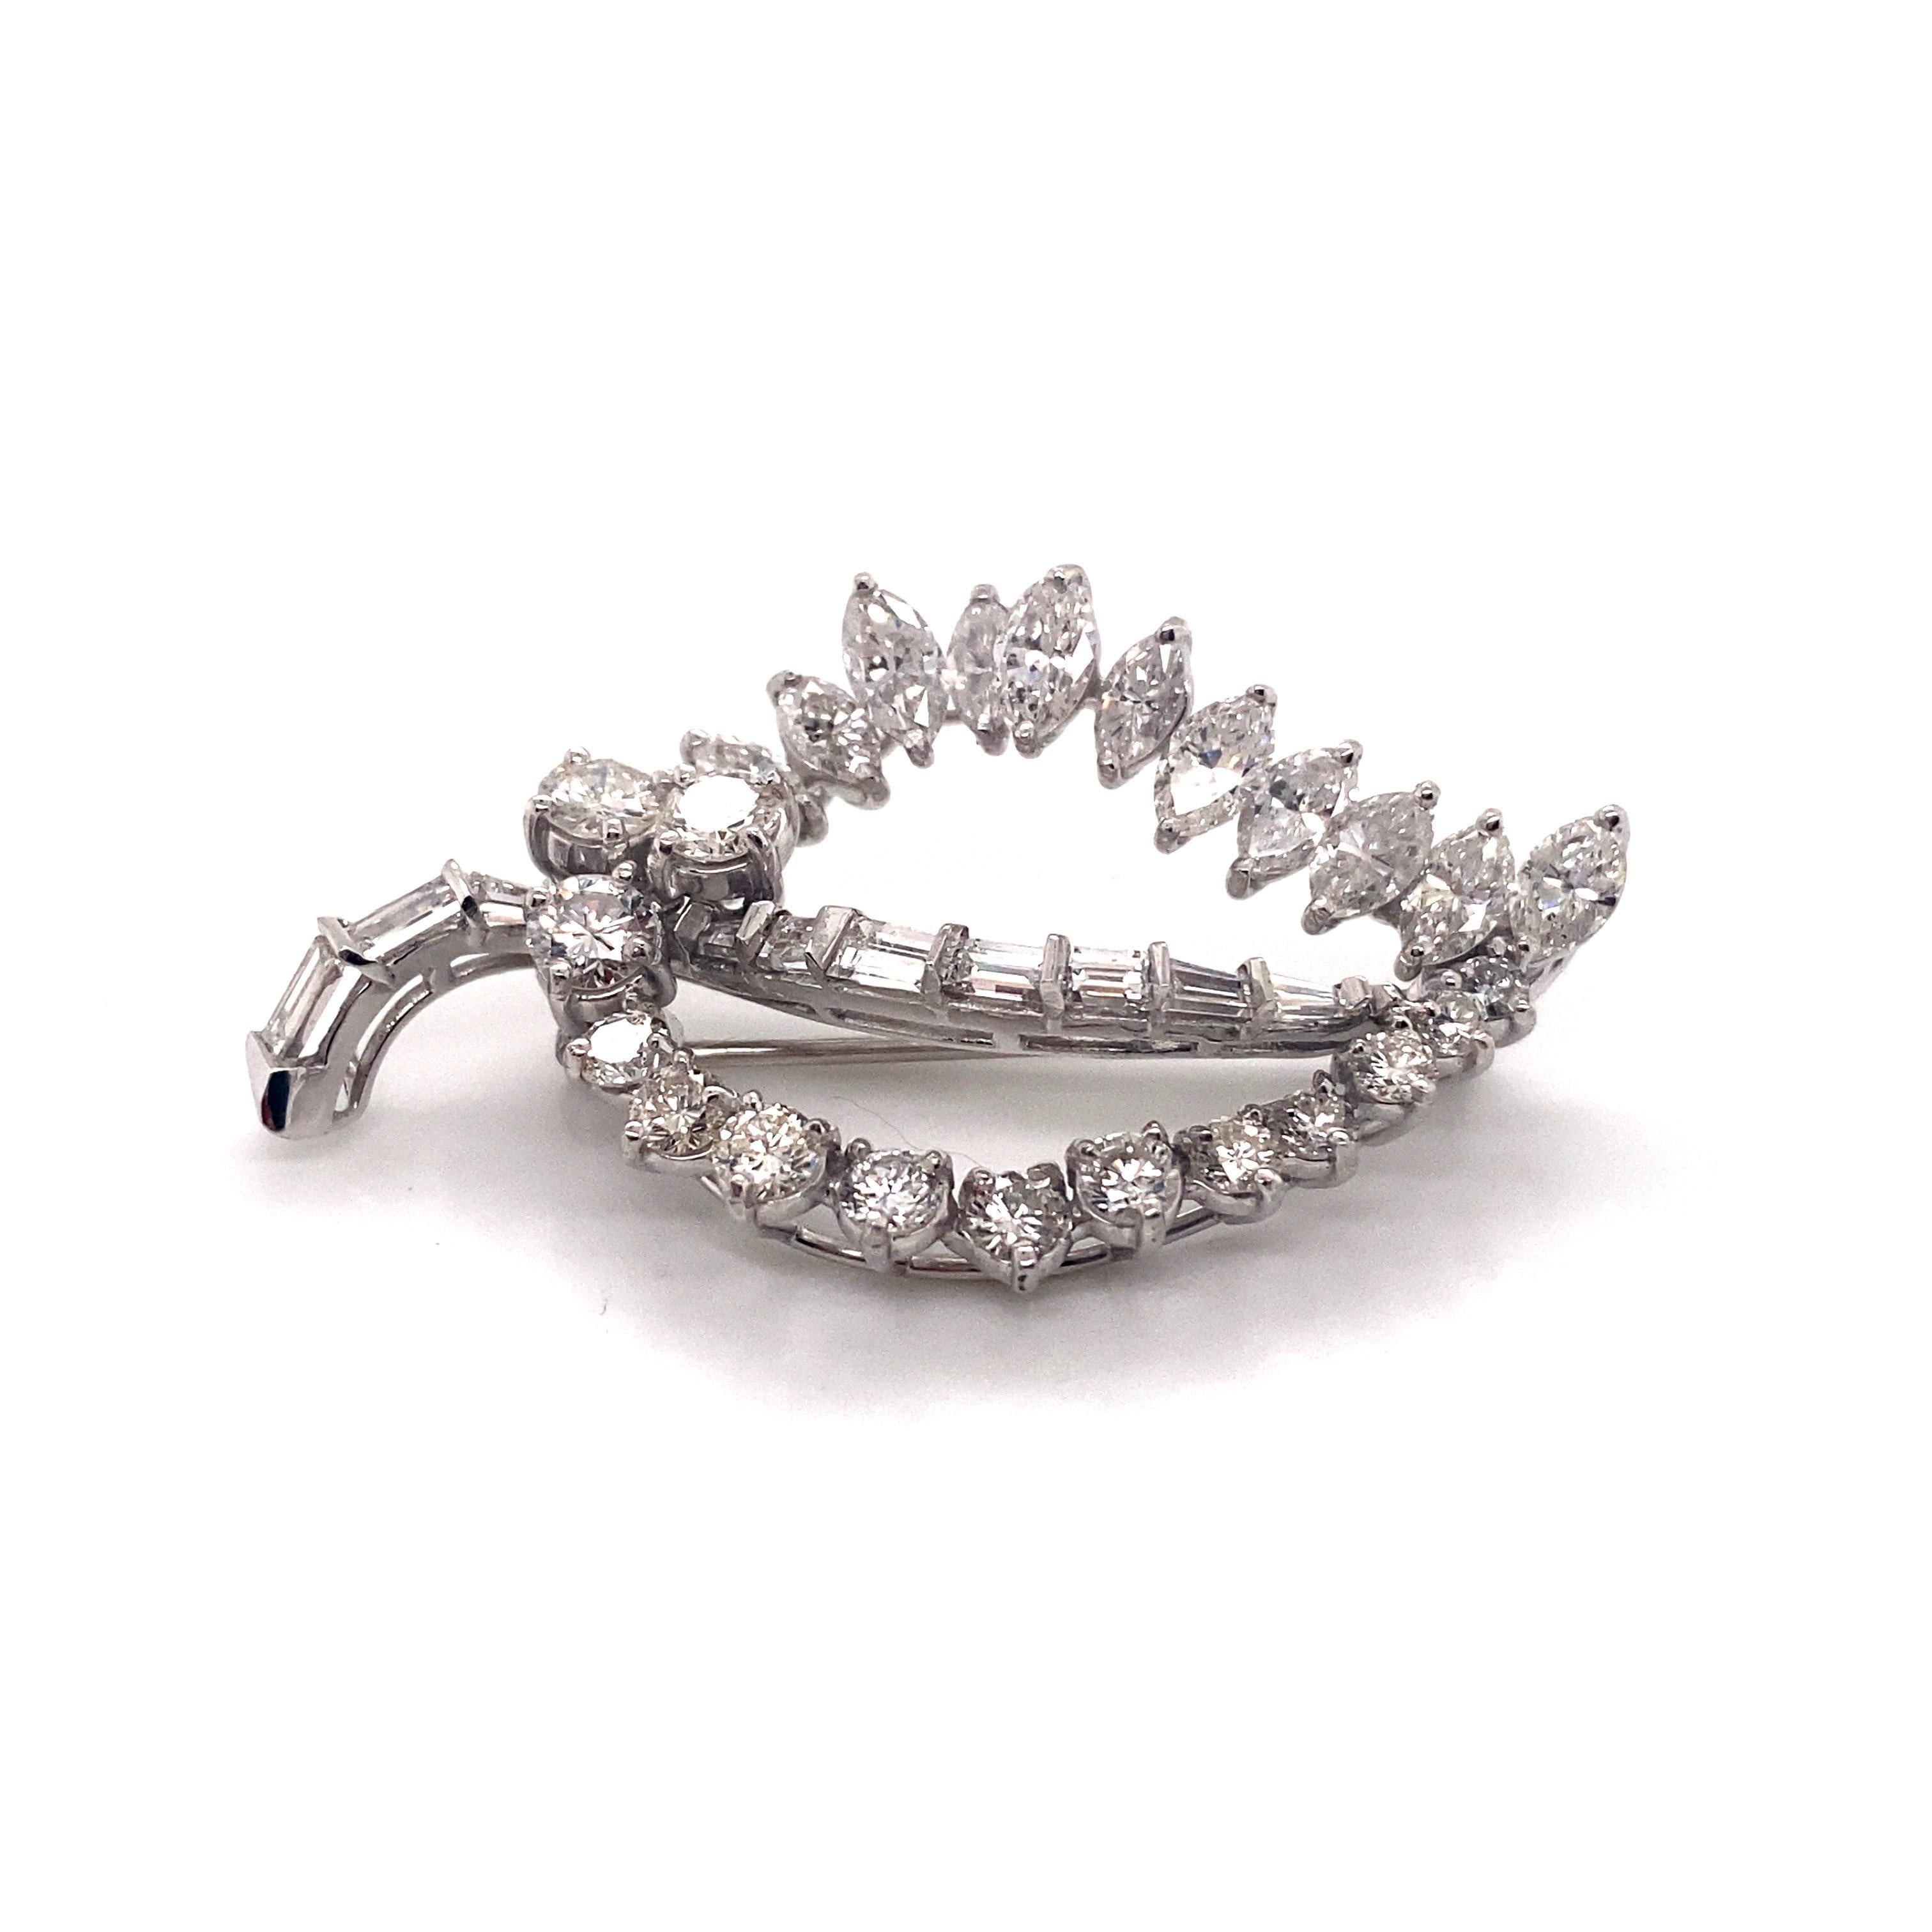 An extraordinary display of 1960s jewelry artistry, this vintage platinum leaf brooch dazzles with nearly 5 carats of brilliant diamonds. The sculptural design features a dimensional leaf motif set with a gorgeous array of diamond shapes. Forming